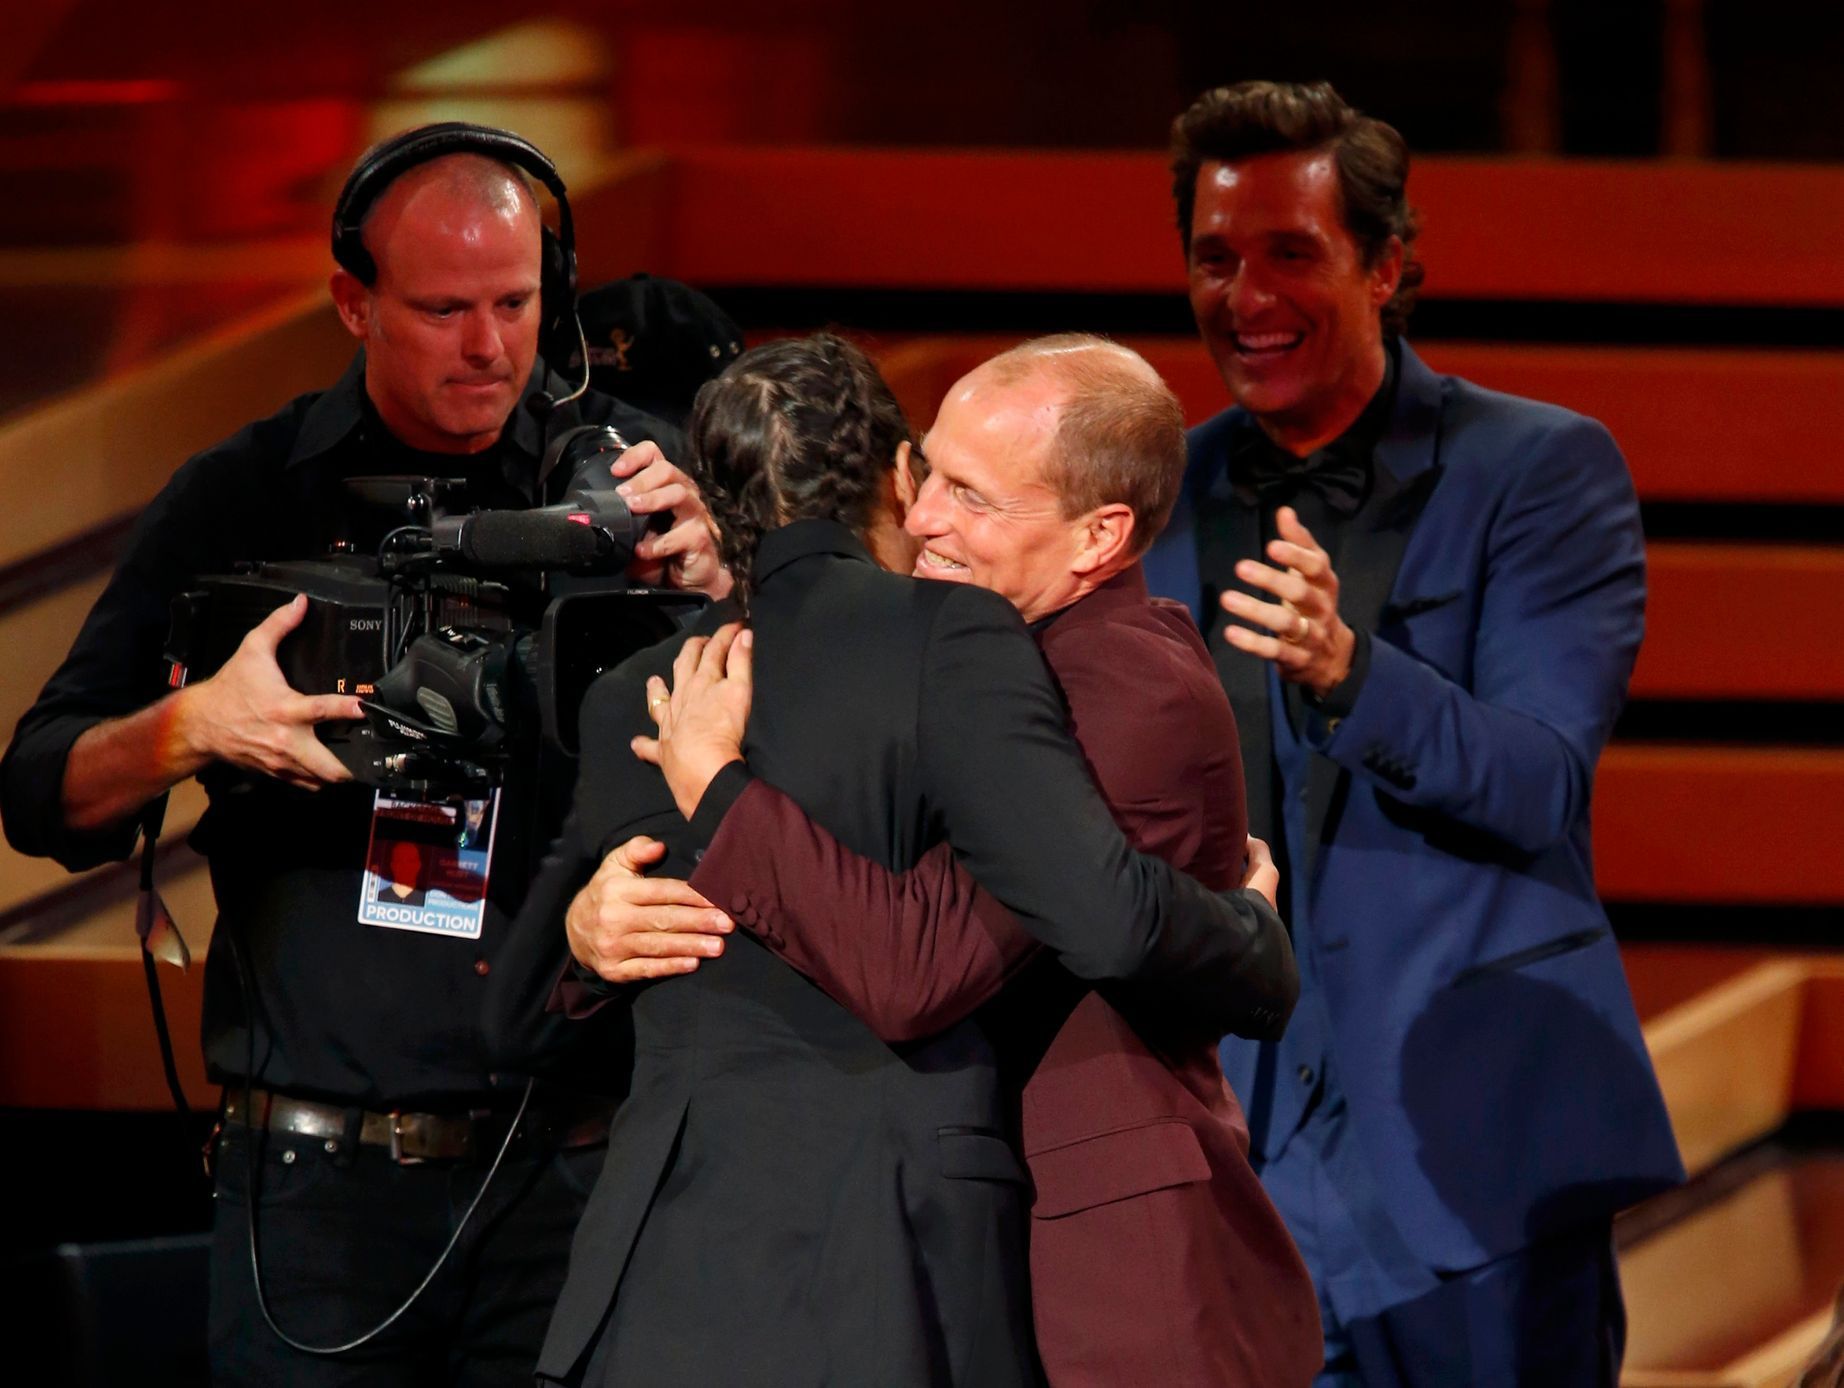 Harrelson hugs director Cary Joji Fukunaga as actor McConaughey applauds as Fukunaga takes the stage to accept the award for Outstanding Directing For A Drama Series for HBO's &quot;True Detective&quo